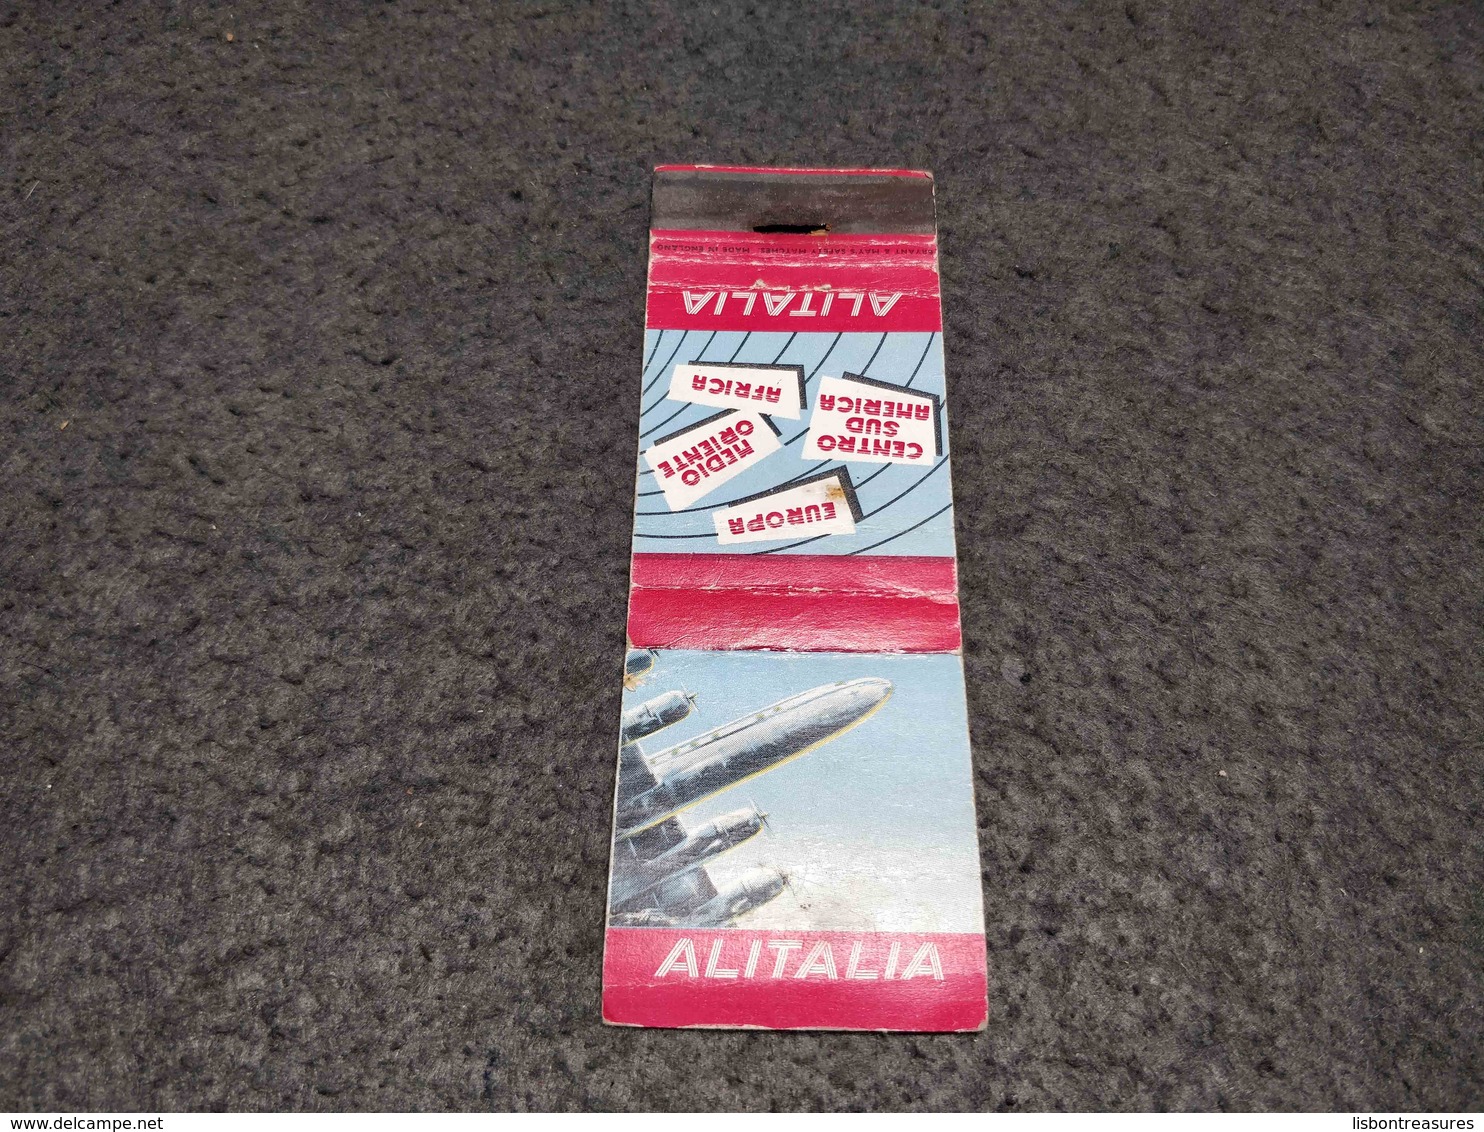 ANTIQUE MATCHBOX MATCHES LABEL ADVERTISING ALITALIA AIRLINES ITALY Nº2 - Streichholzschachteln